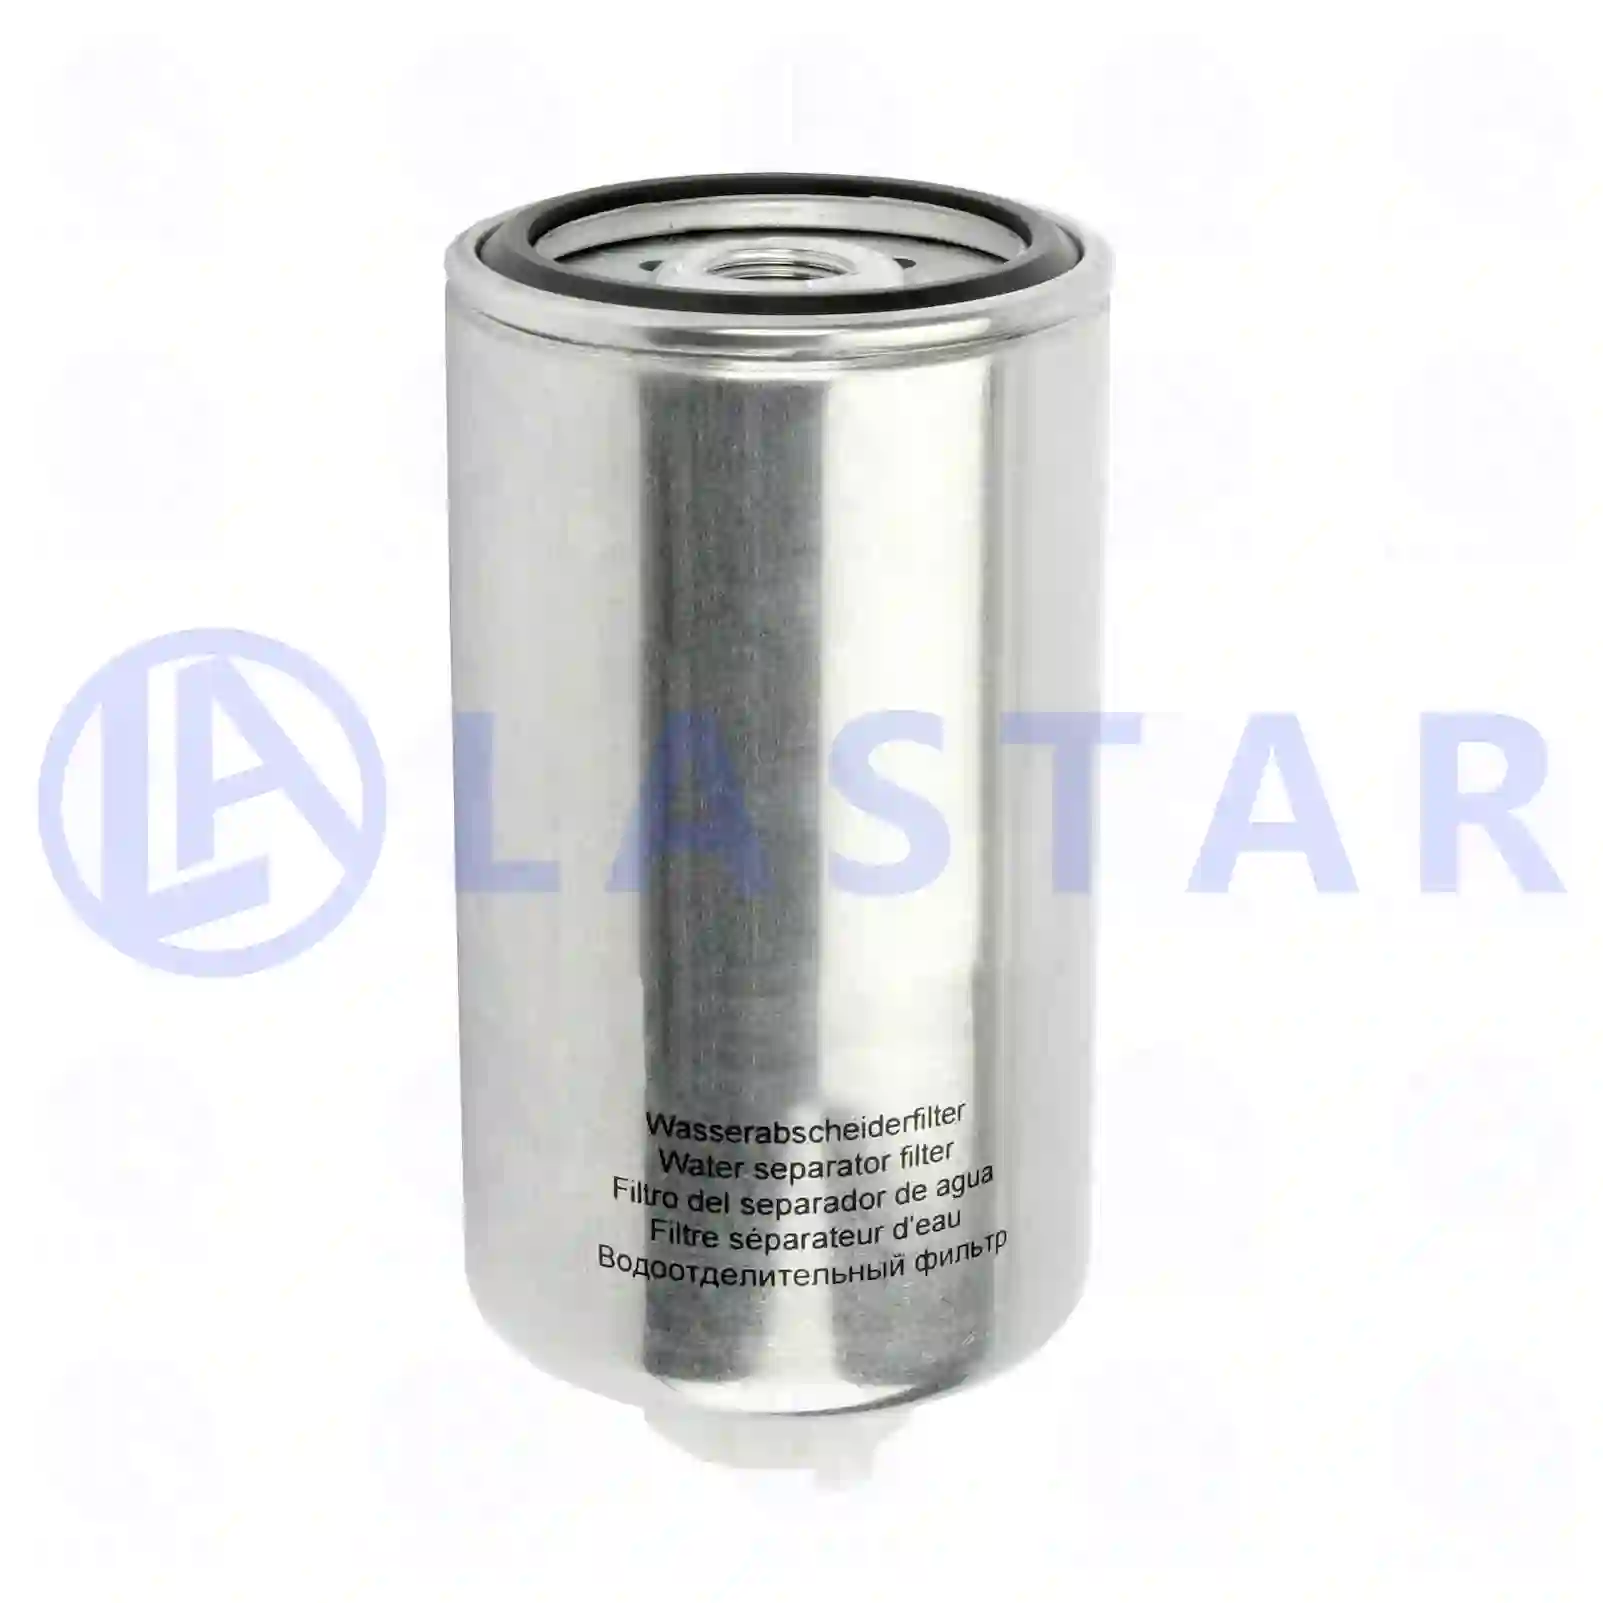 Fuel filter, water separator, 77724165, 0695832, 695832, 81125030072, ZG10163-0008 ||  77724165 Lastar Spare Part | Truck Spare Parts, Auotomotive Spare Parts Fuel filter, water separator, 77724165, 0695832, 695832, 81125030072, ZG10163-0008 ||  77724165 Lastar Spare Part | Truck Spare Parts, Auotomotive Spare Parts